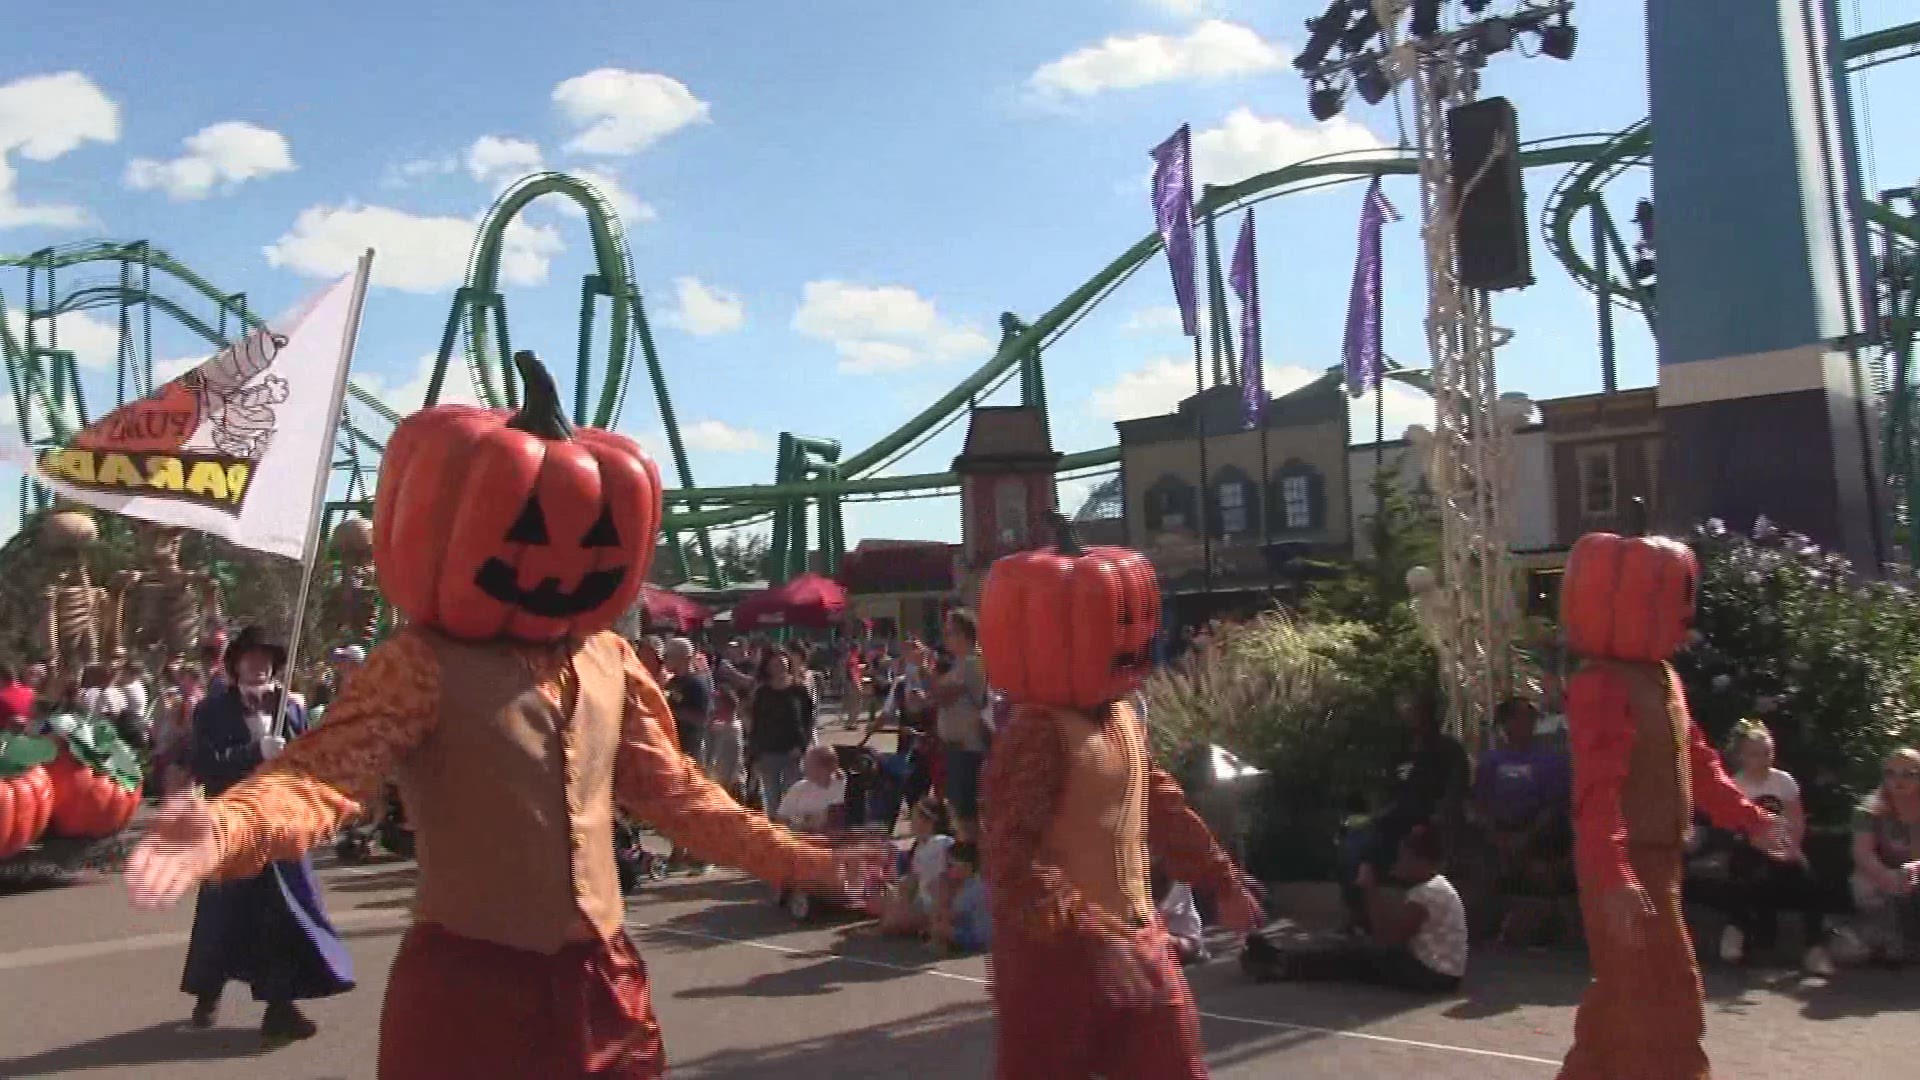 Cedar Point's popular HalloWeekends parade -- The Great Pumpkin Parade -- is back for the 2019 Halloween season. Here's a peek at what you can expect.